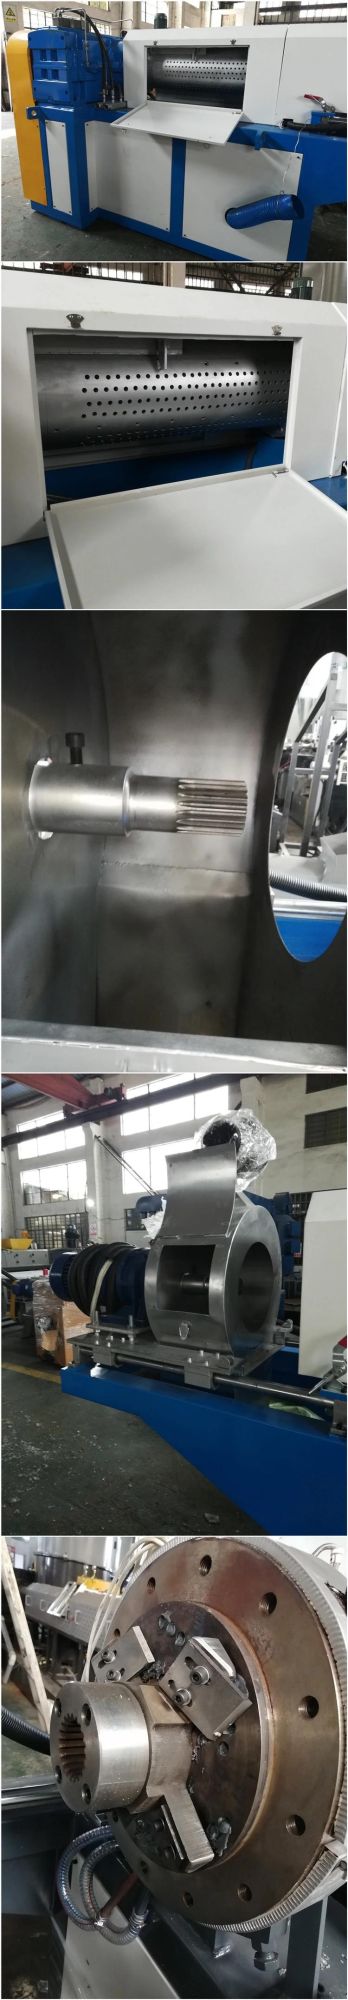 China Made Plastic Film Squeezer Machine Cleaning Device for Plastic Film